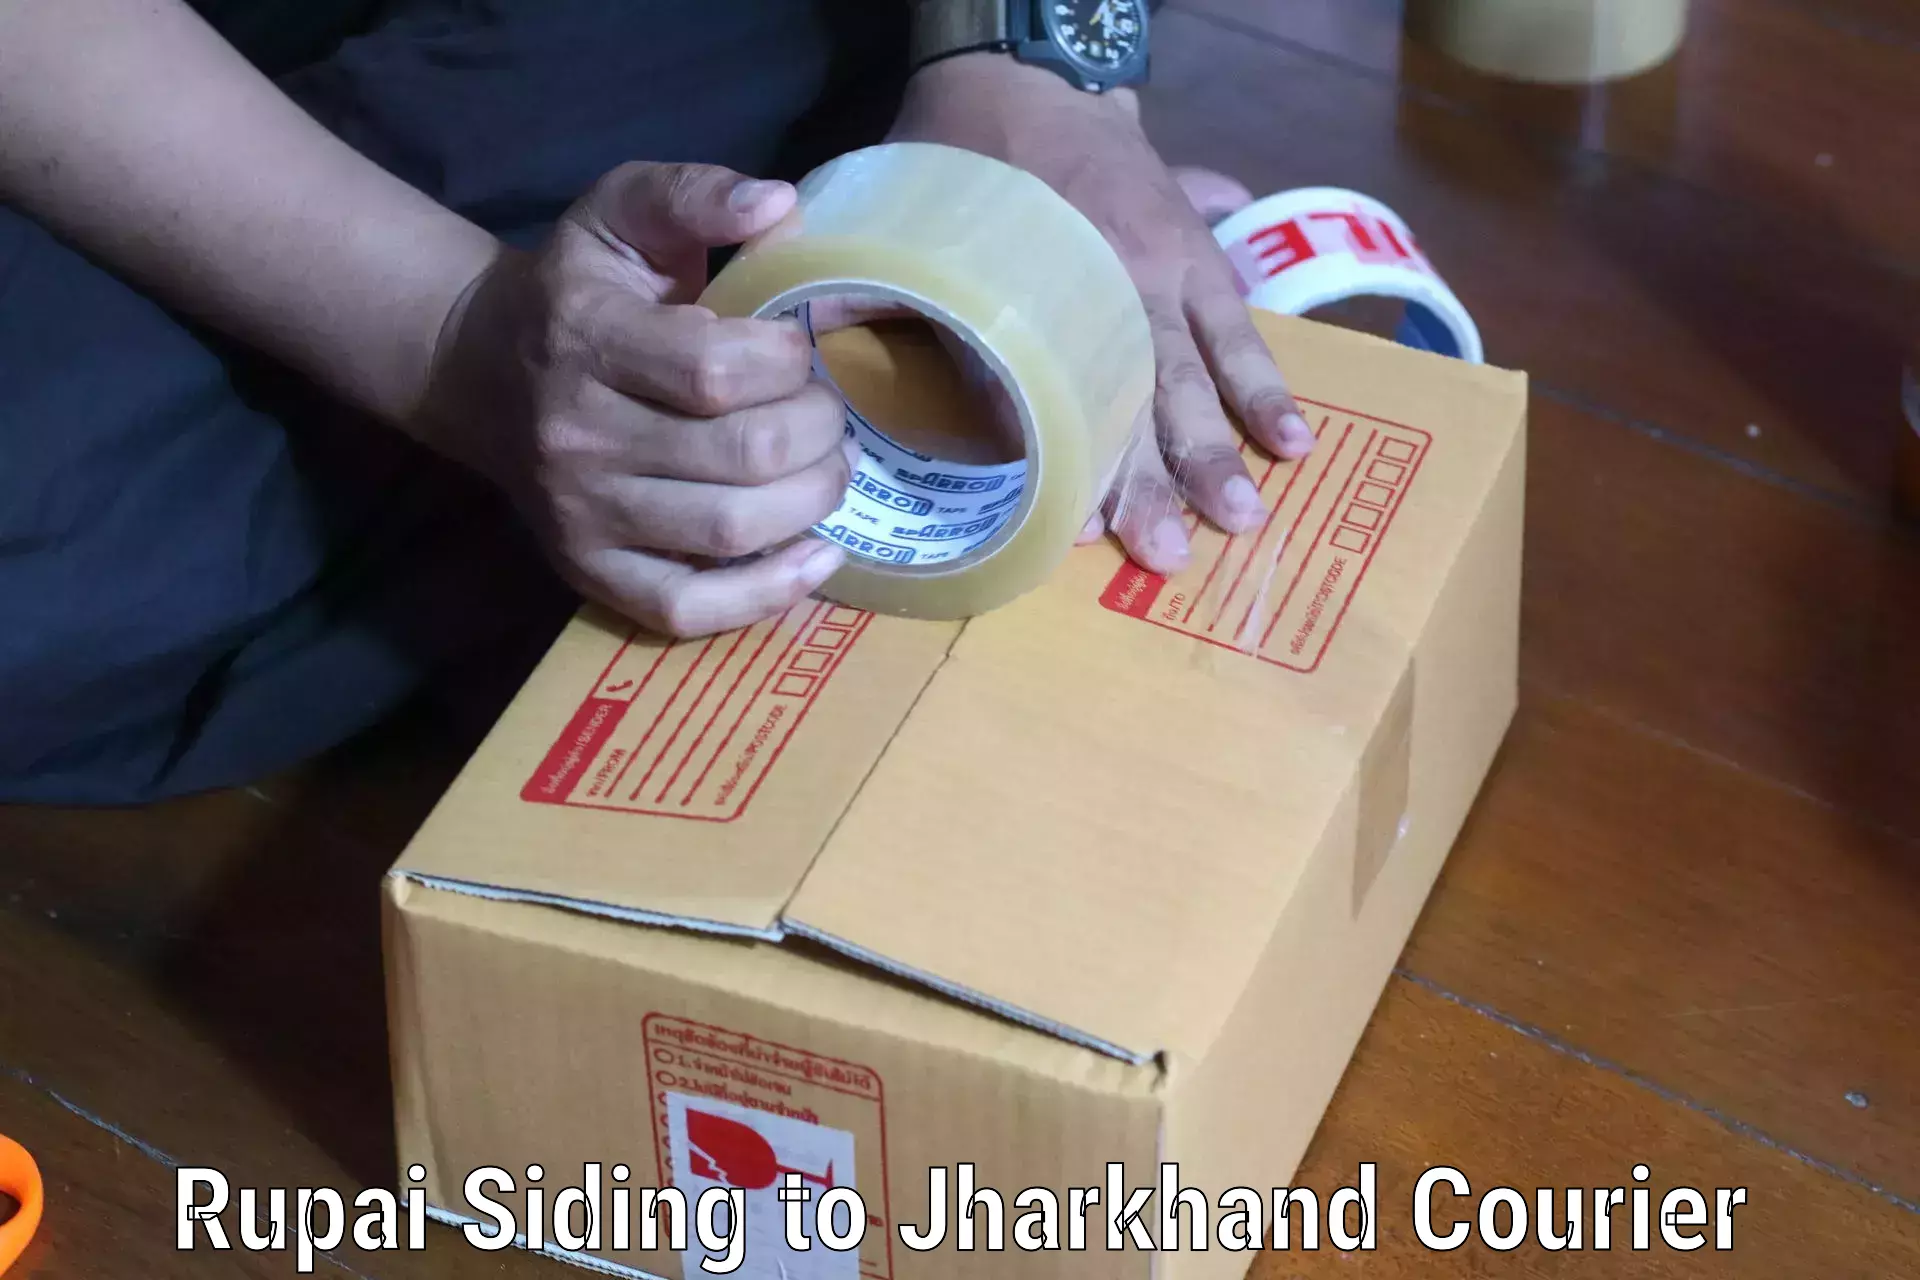 Rapid shipping services in Rupai Siding to Gobindpur